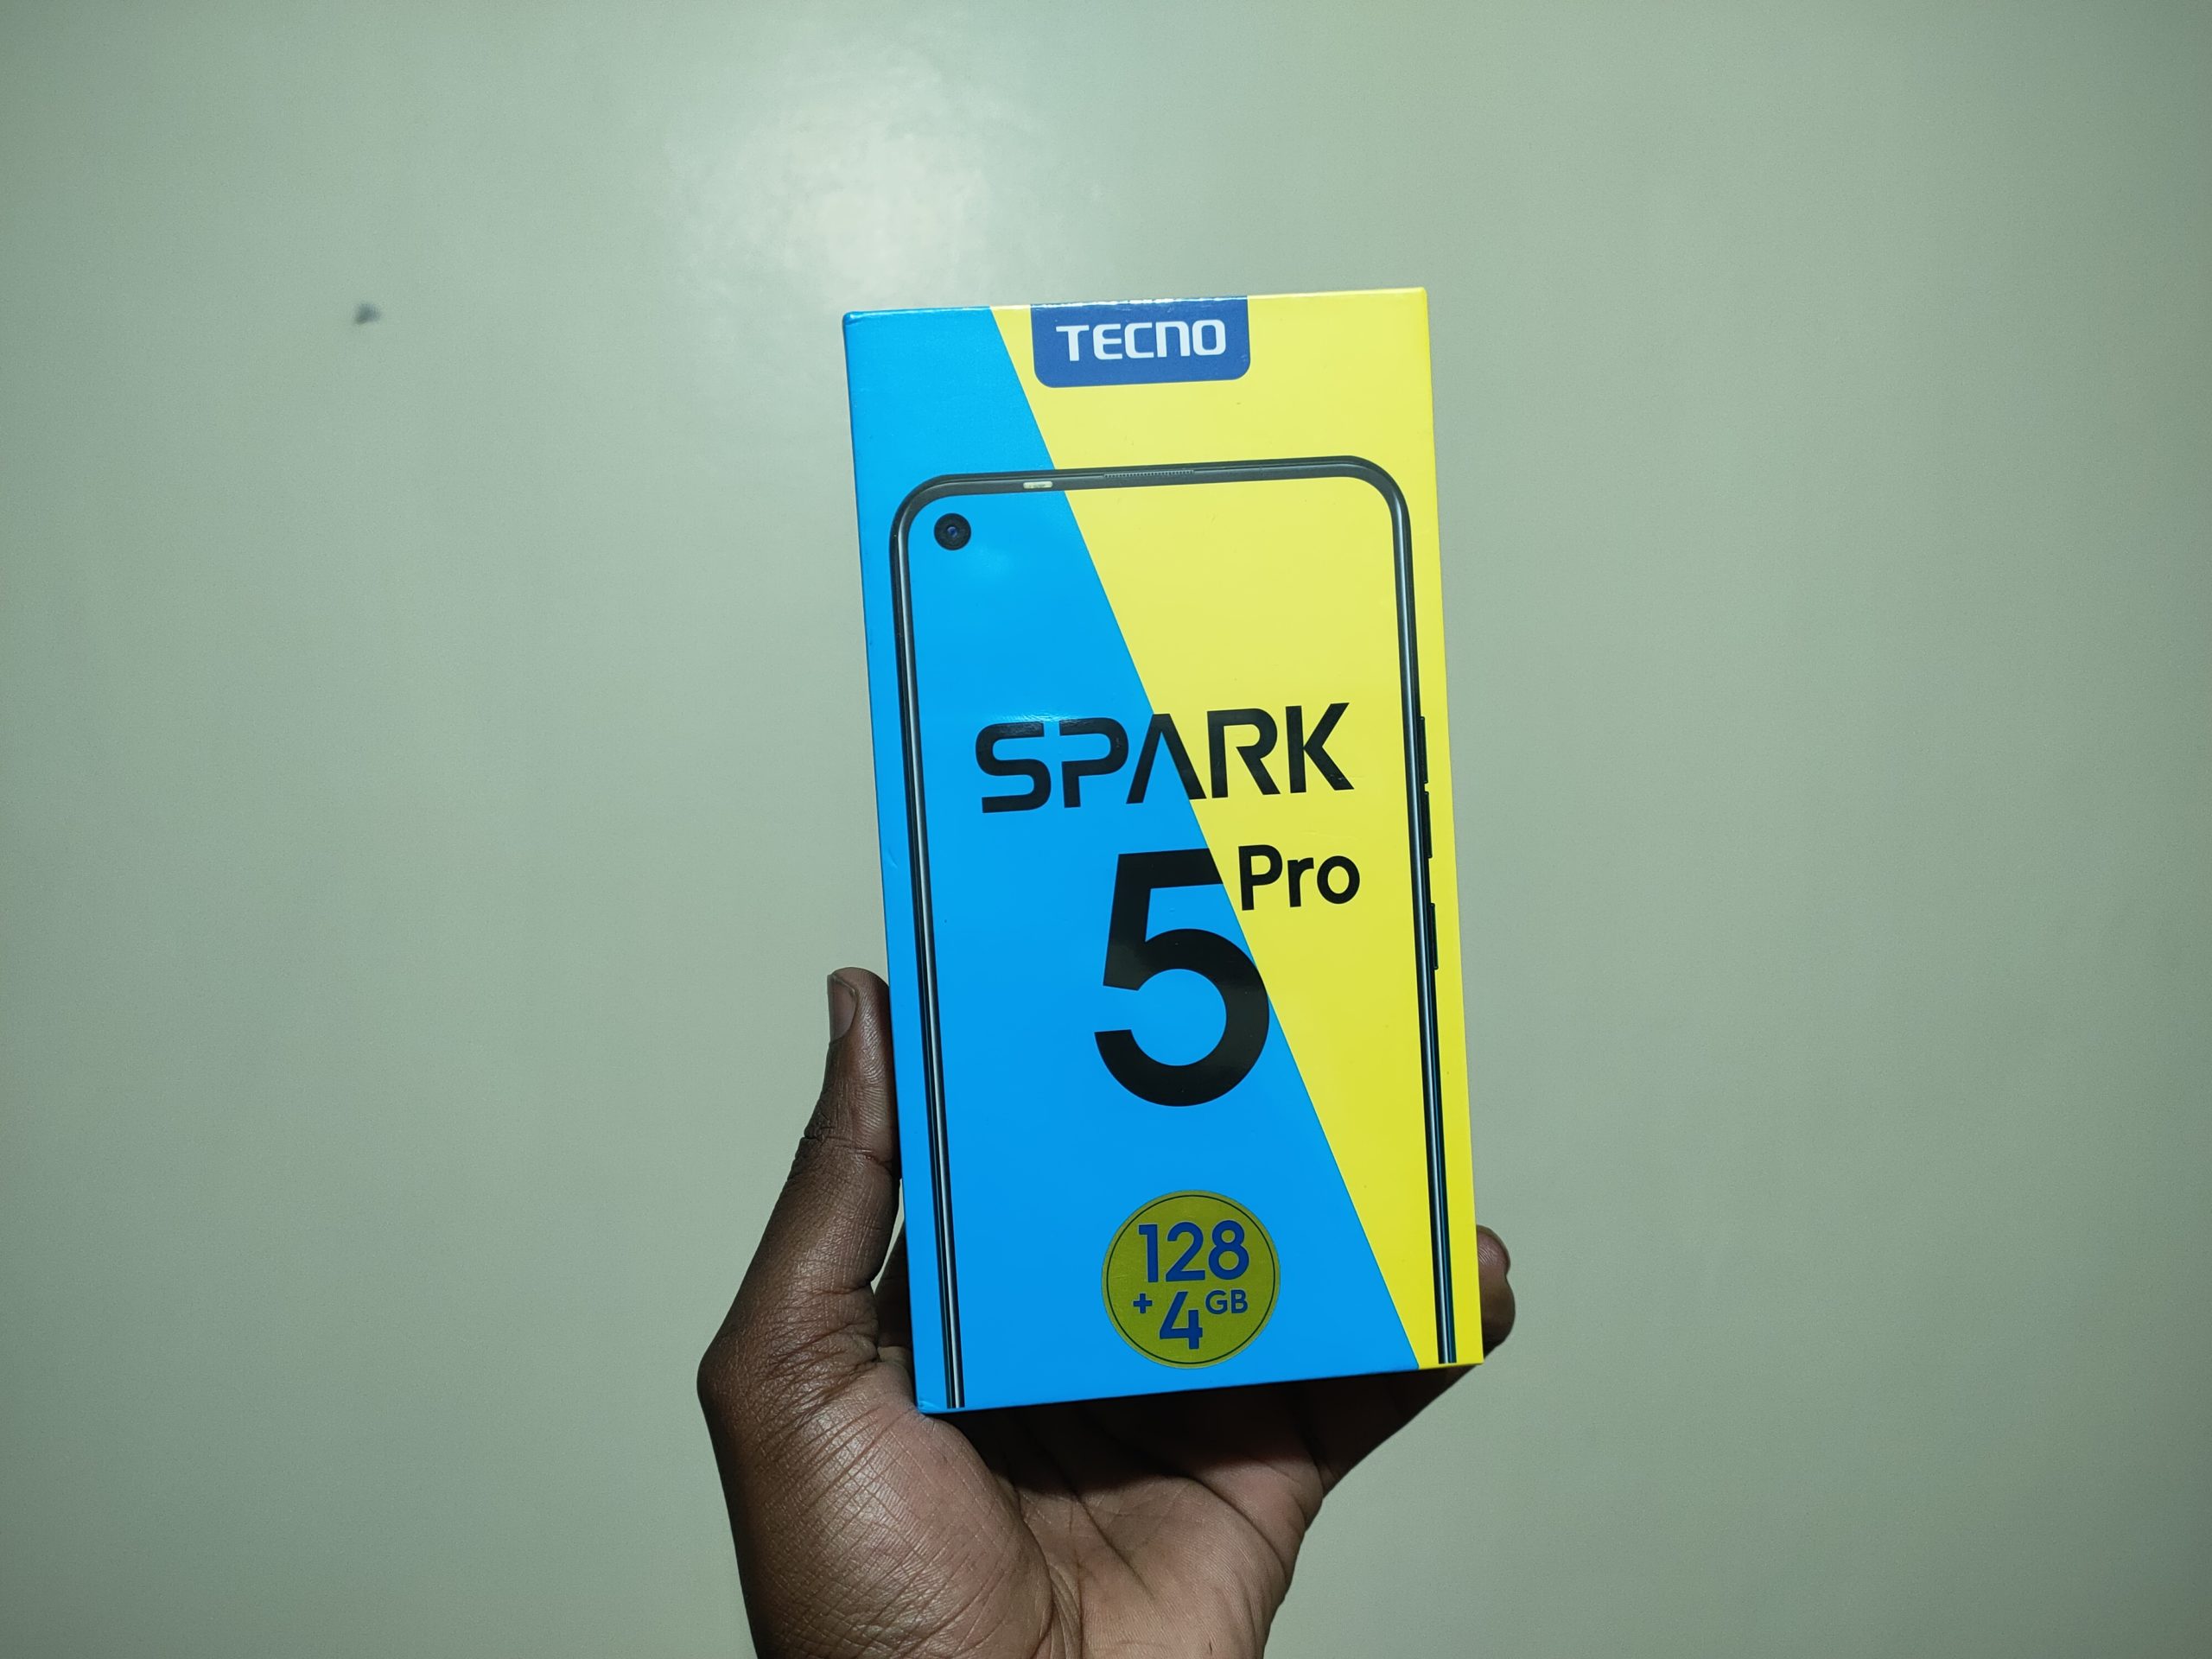 TECNO Spark 5 PRO now available for Pre-order in Kenya